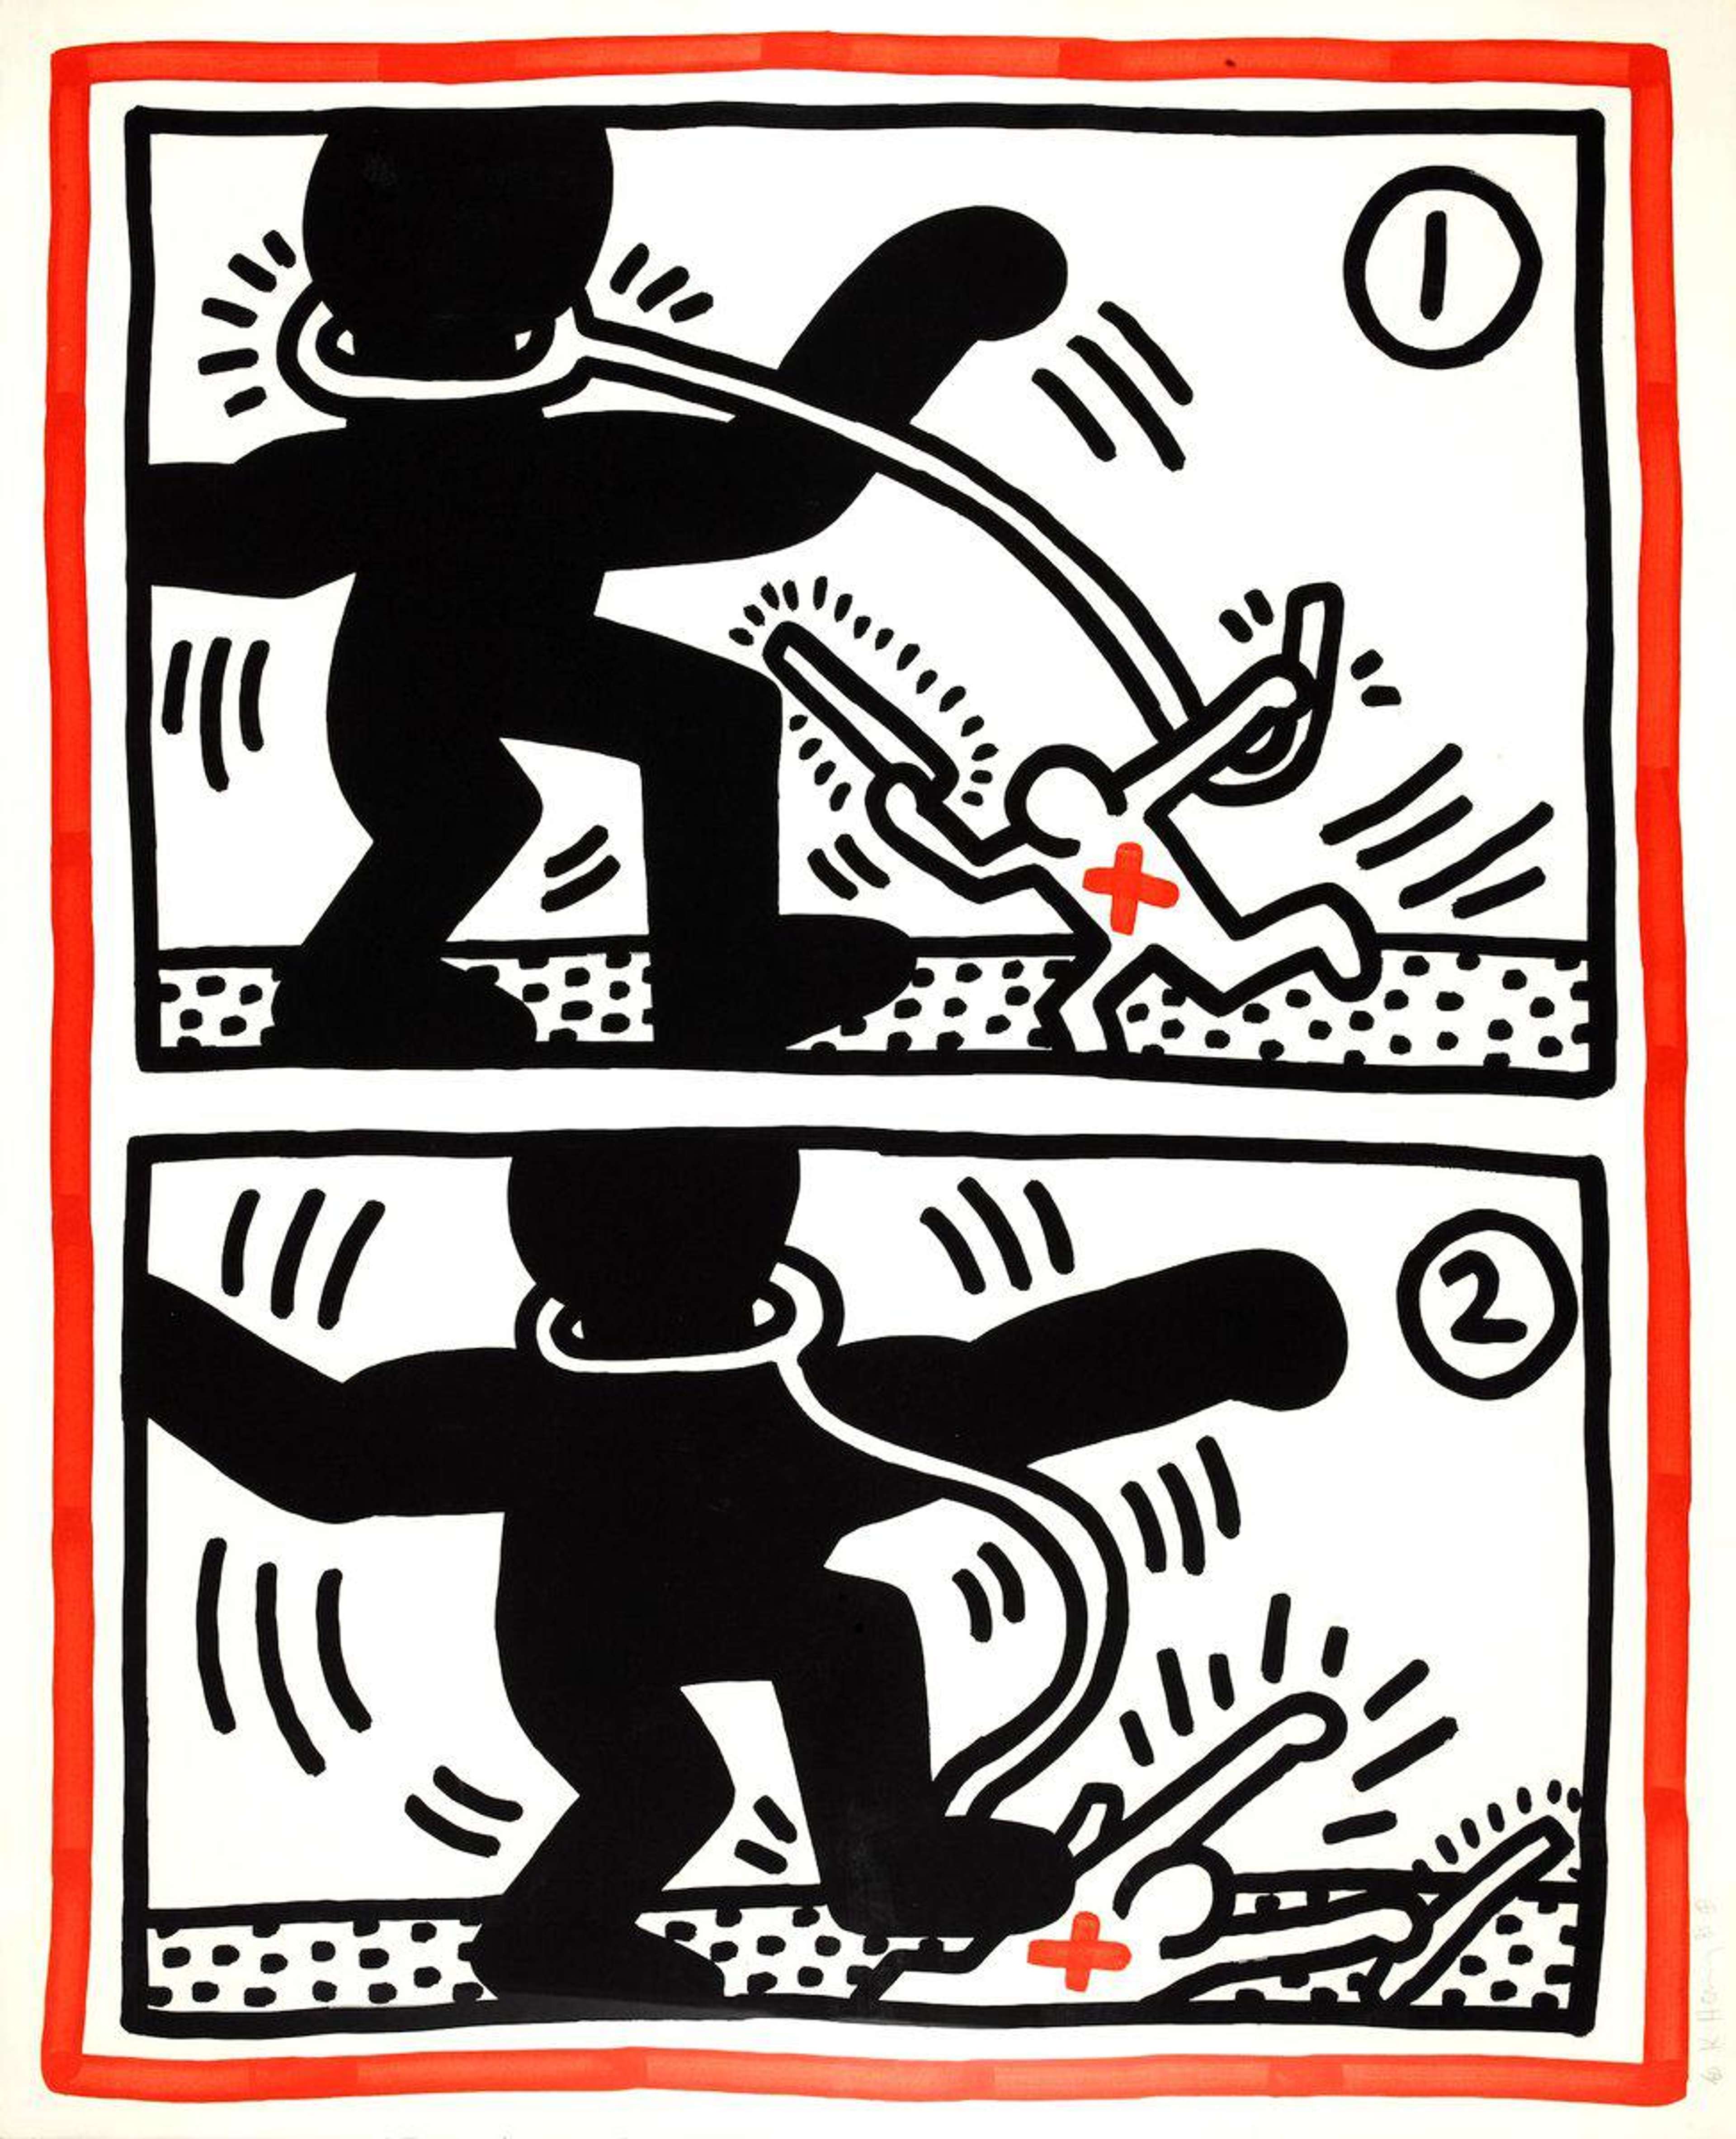 Keith Haring’s Free South Africa 3. A Pop Art print of a black figure raising its foot, stepping on the outline of a white figure in the style of Pop Art.